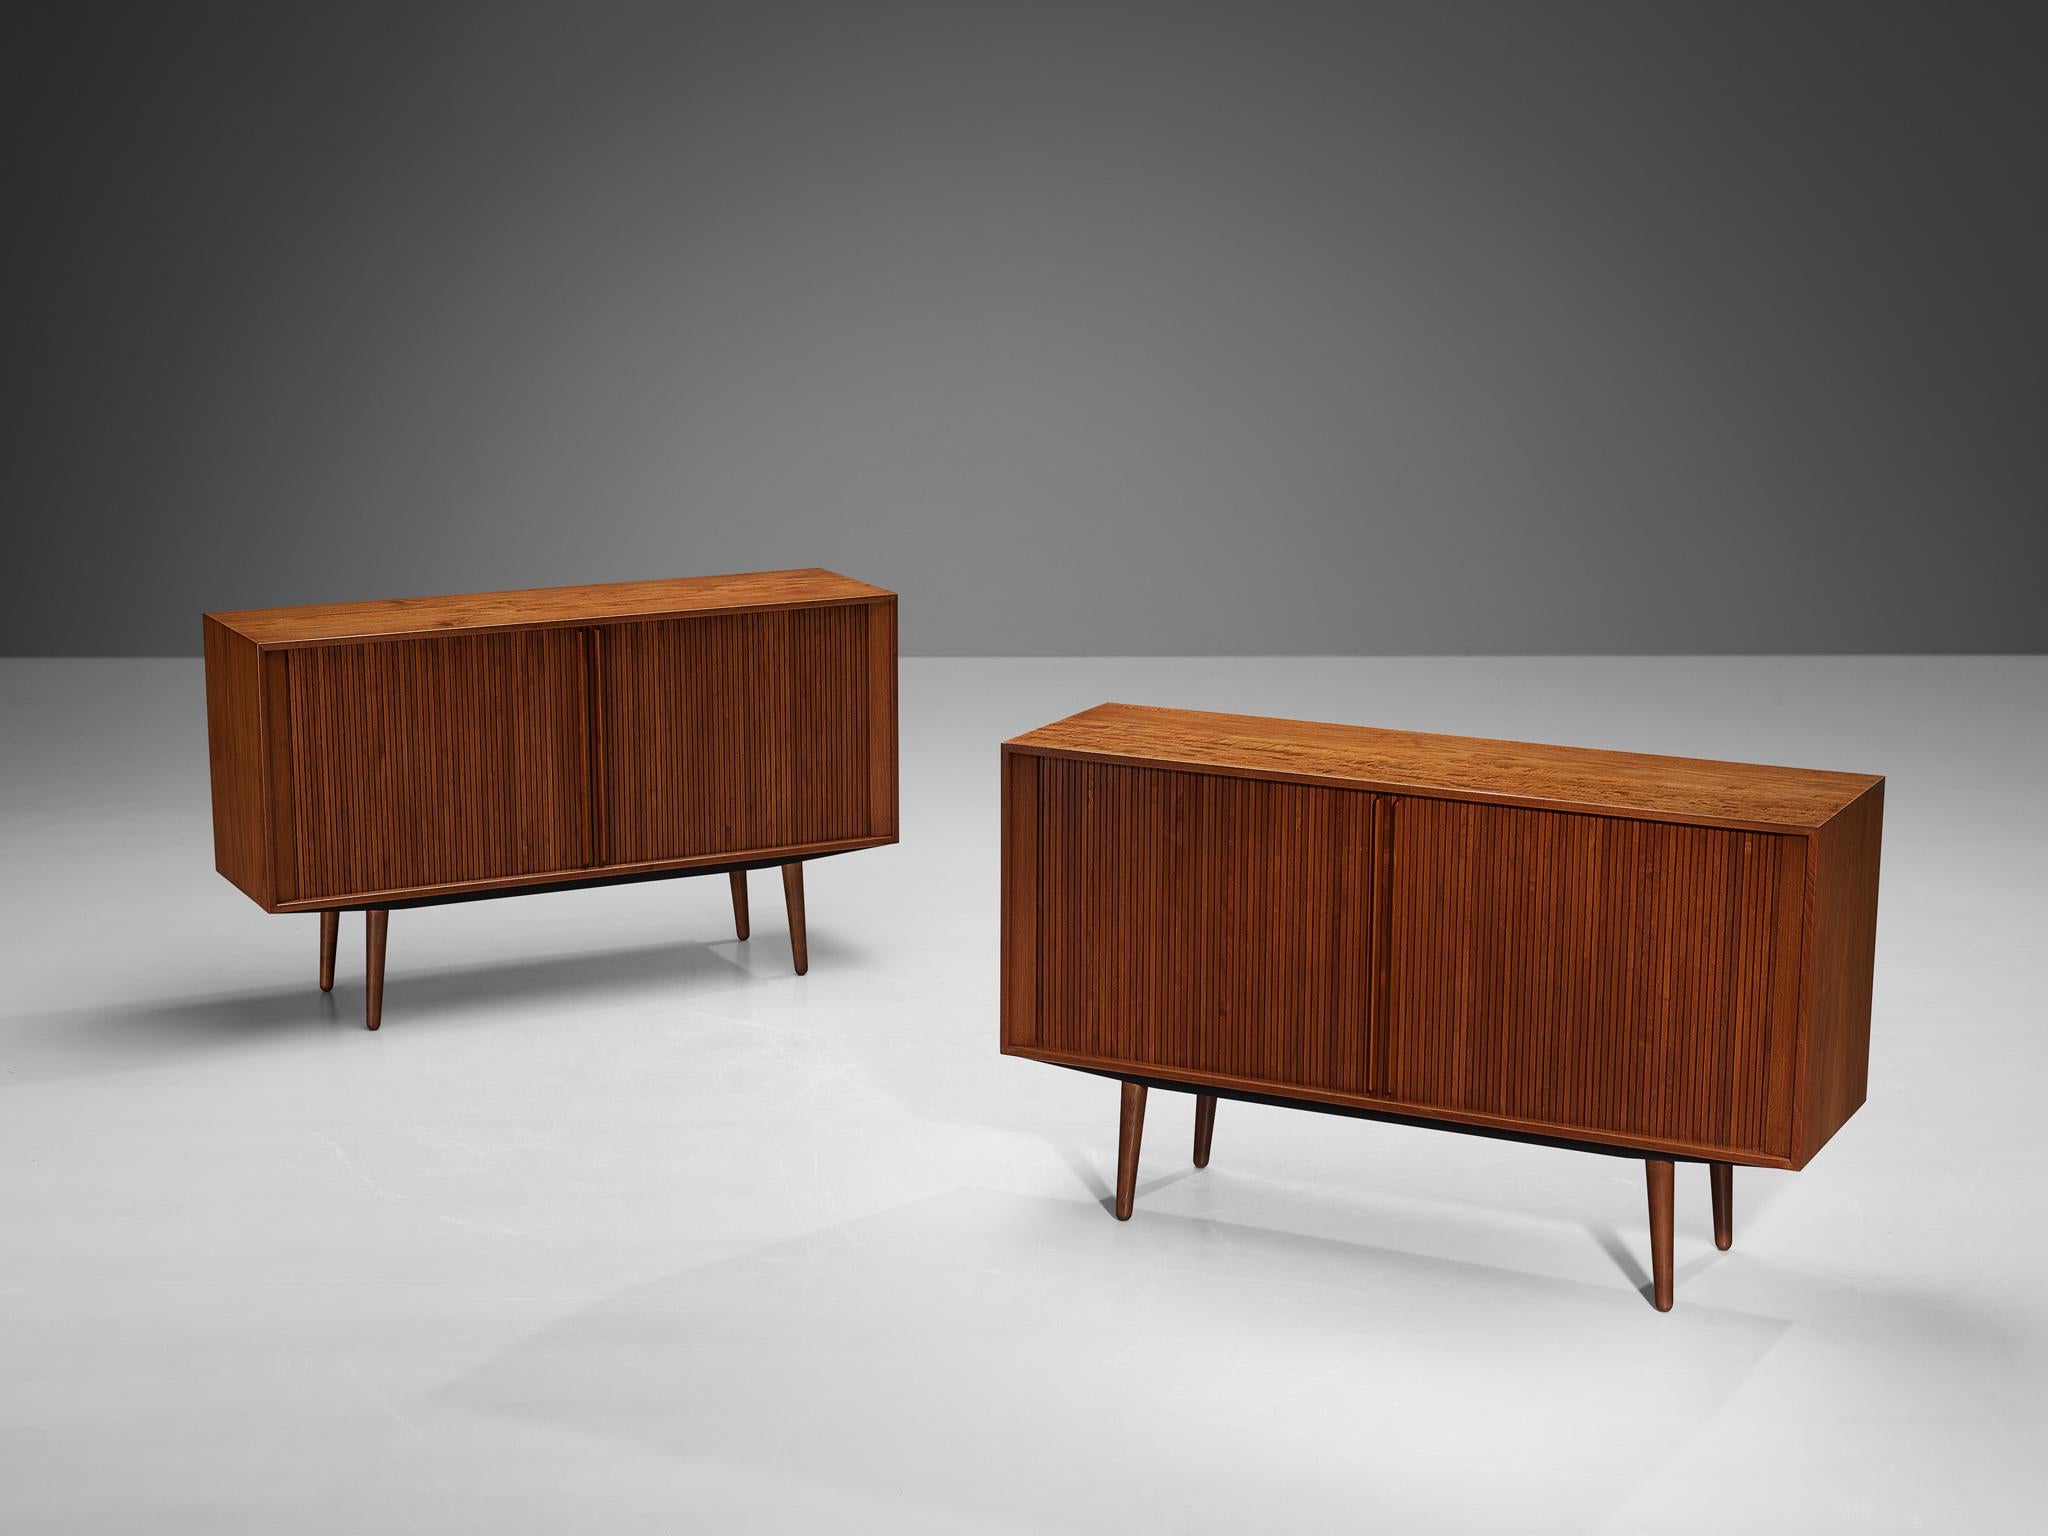 Cabinets, teak, birch, felt, Denmark, 1950s

This sideboard is exemplary for refined, highly detailed and very well-made furniture. The front corpus is furnished with tambour door panels that easily move sideways. The extended doorhandles and